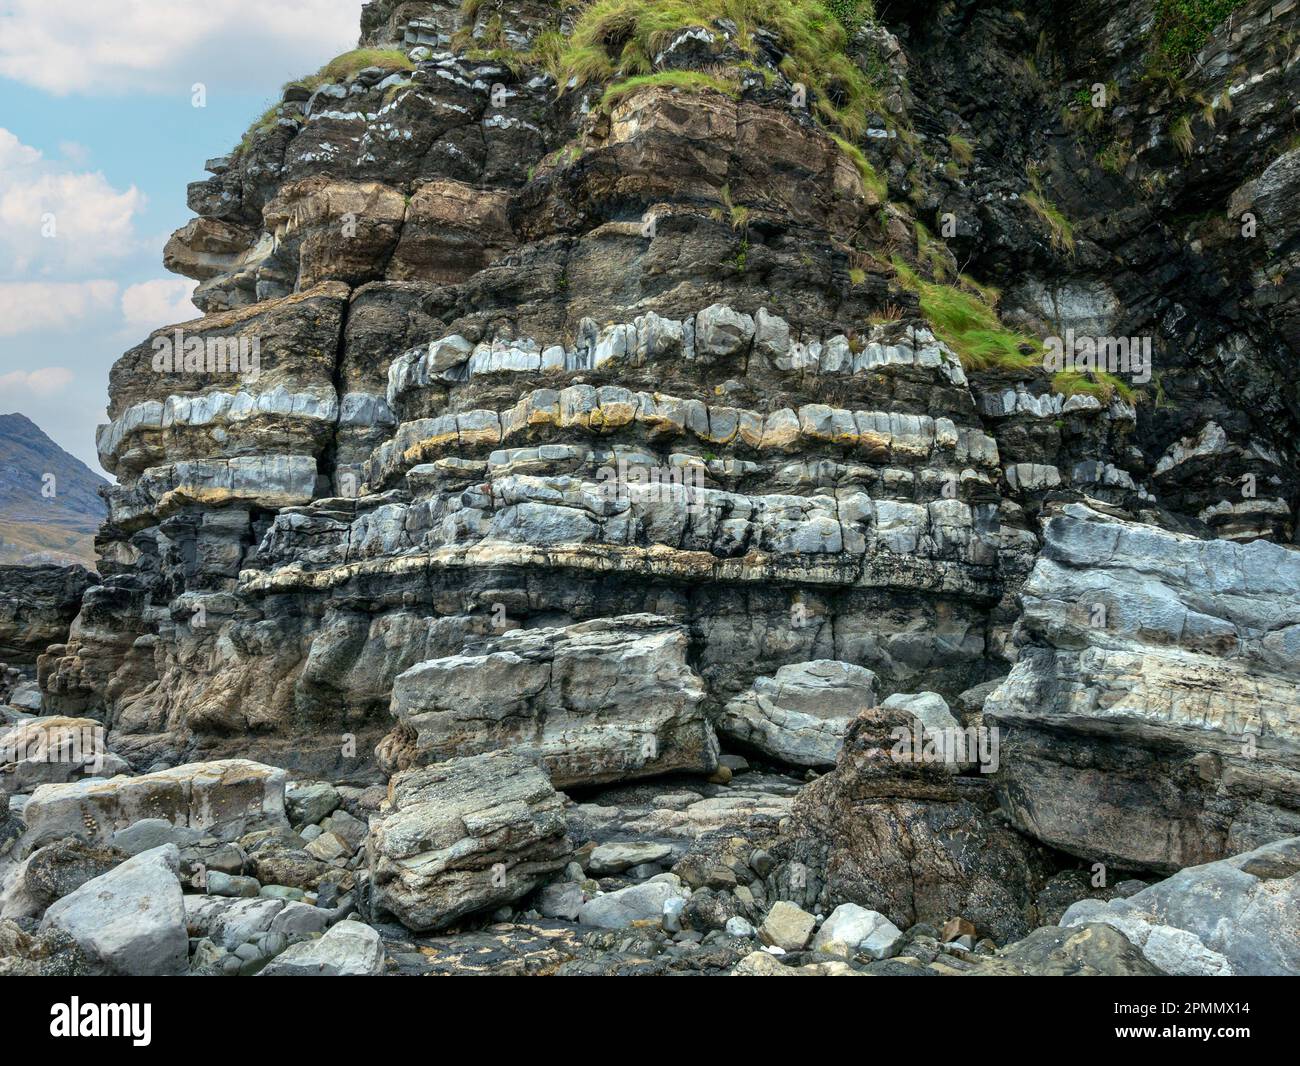 Banded sedimentary rock layers of sandstone, siltstone and mudstone in the Staffin Shale formation, Scaladal bay, Isle of Skye, Scotland, UK Stock Photo